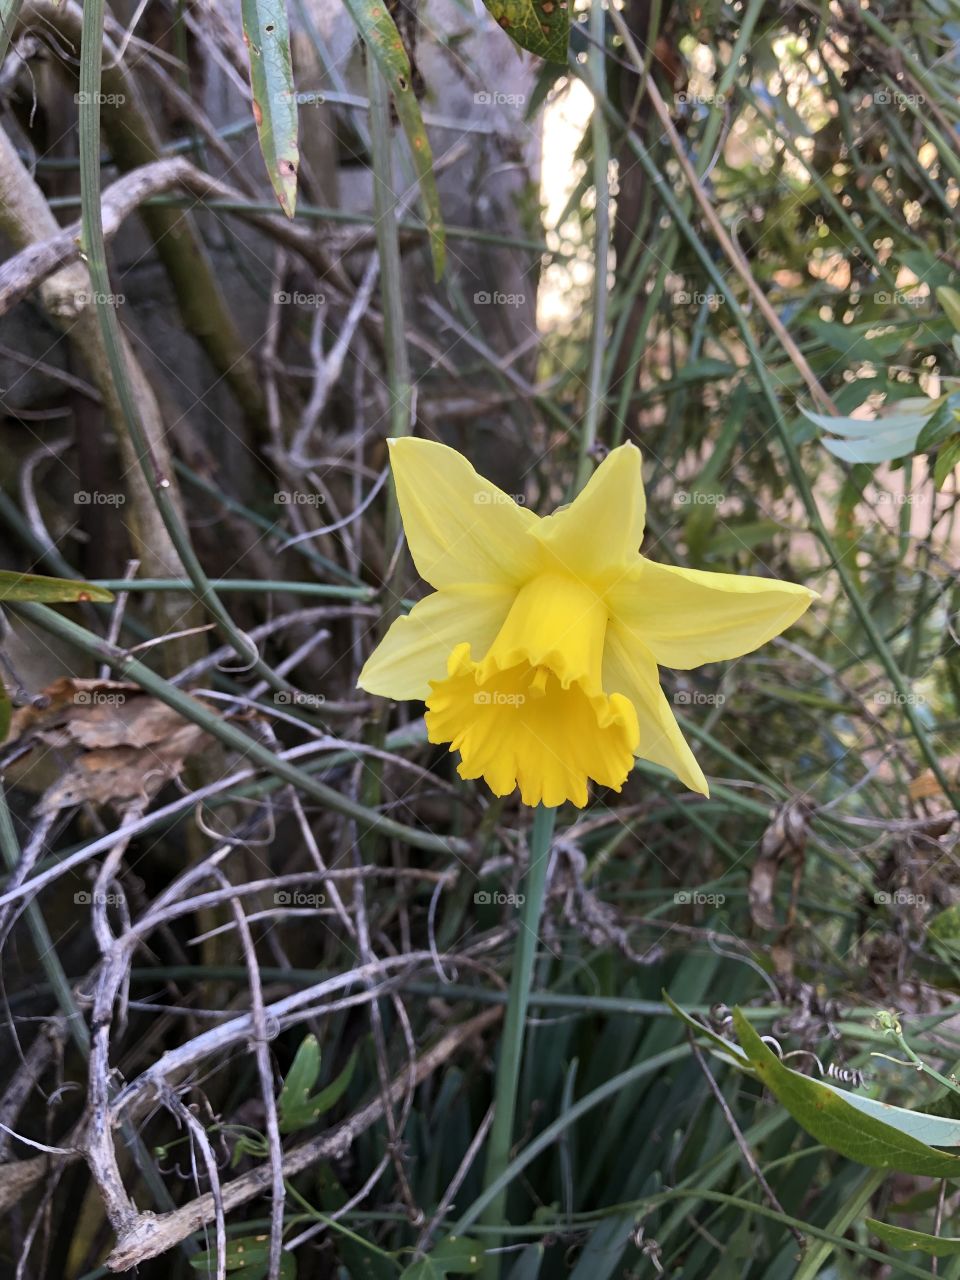 I like to record the first sitting of a spring daffodil from our garden, the date 13012019